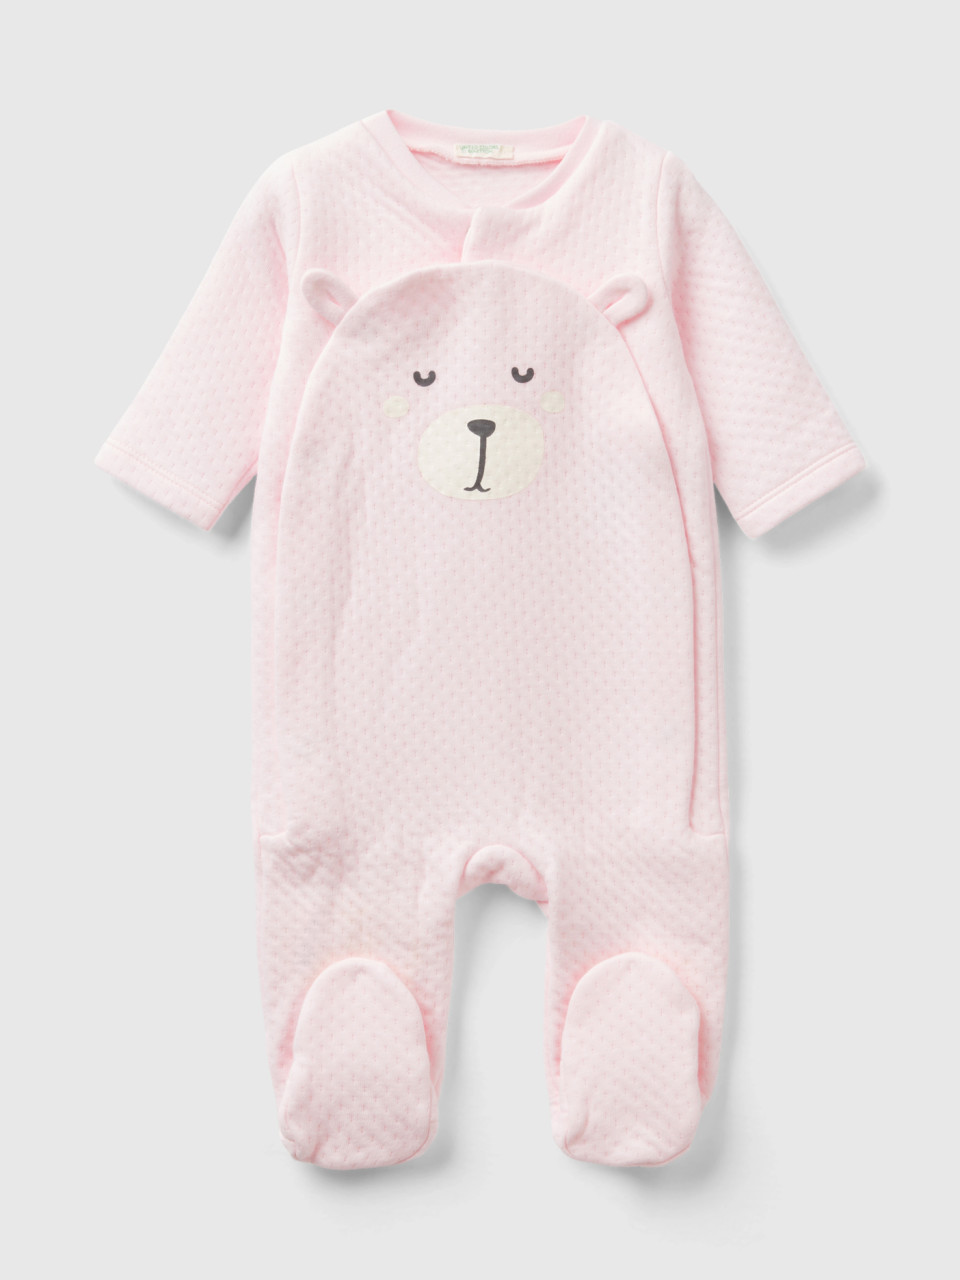 Benetton, Teddy Bear Onesie With Quilted Look, Soft Pink, Kids